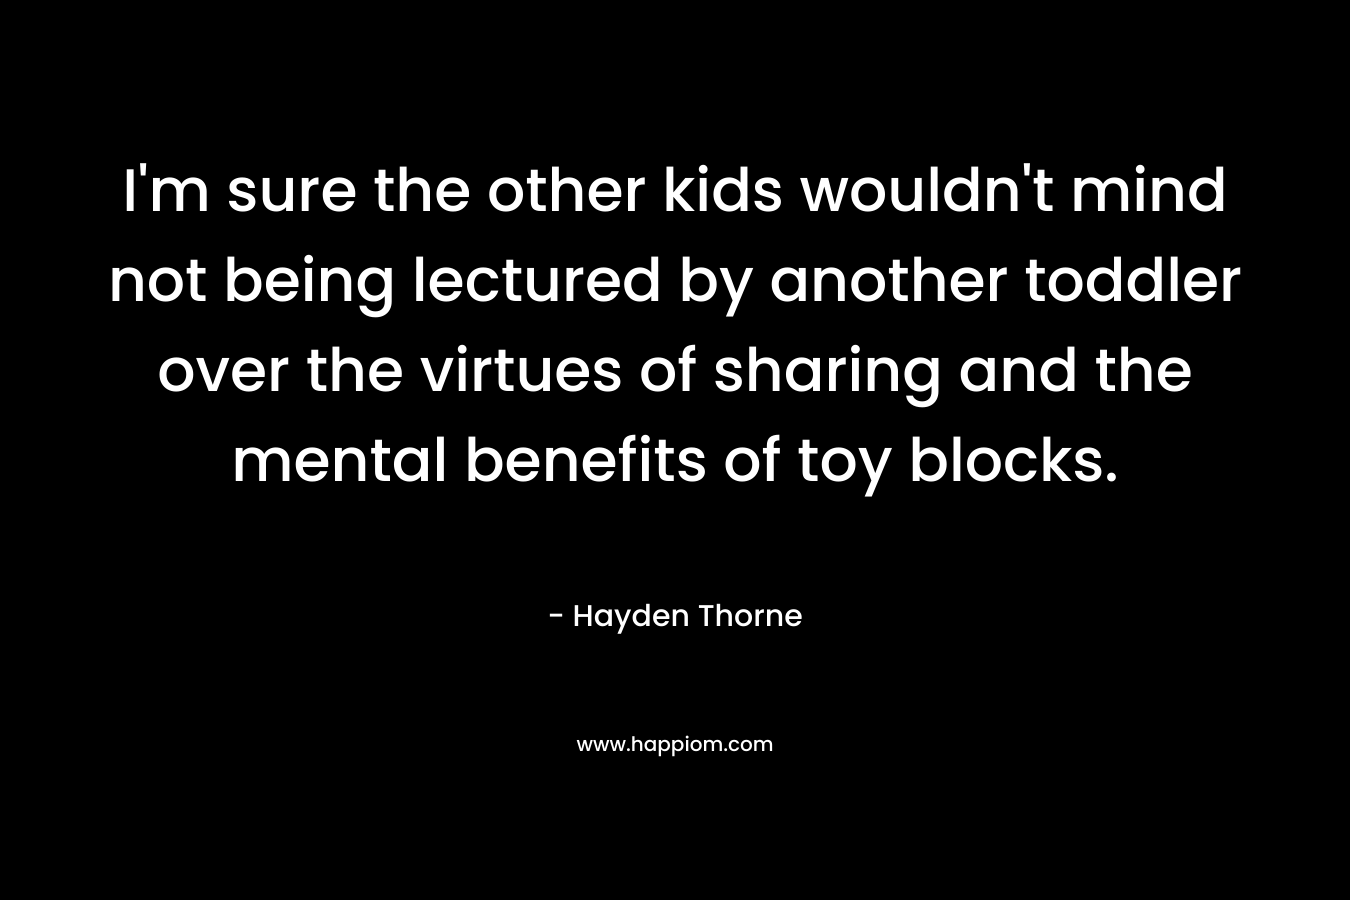 I'm sure the other kids wouldn't mind not being lectured by another toddler over the virtues of sharing and the mental benefits of toy blocks.